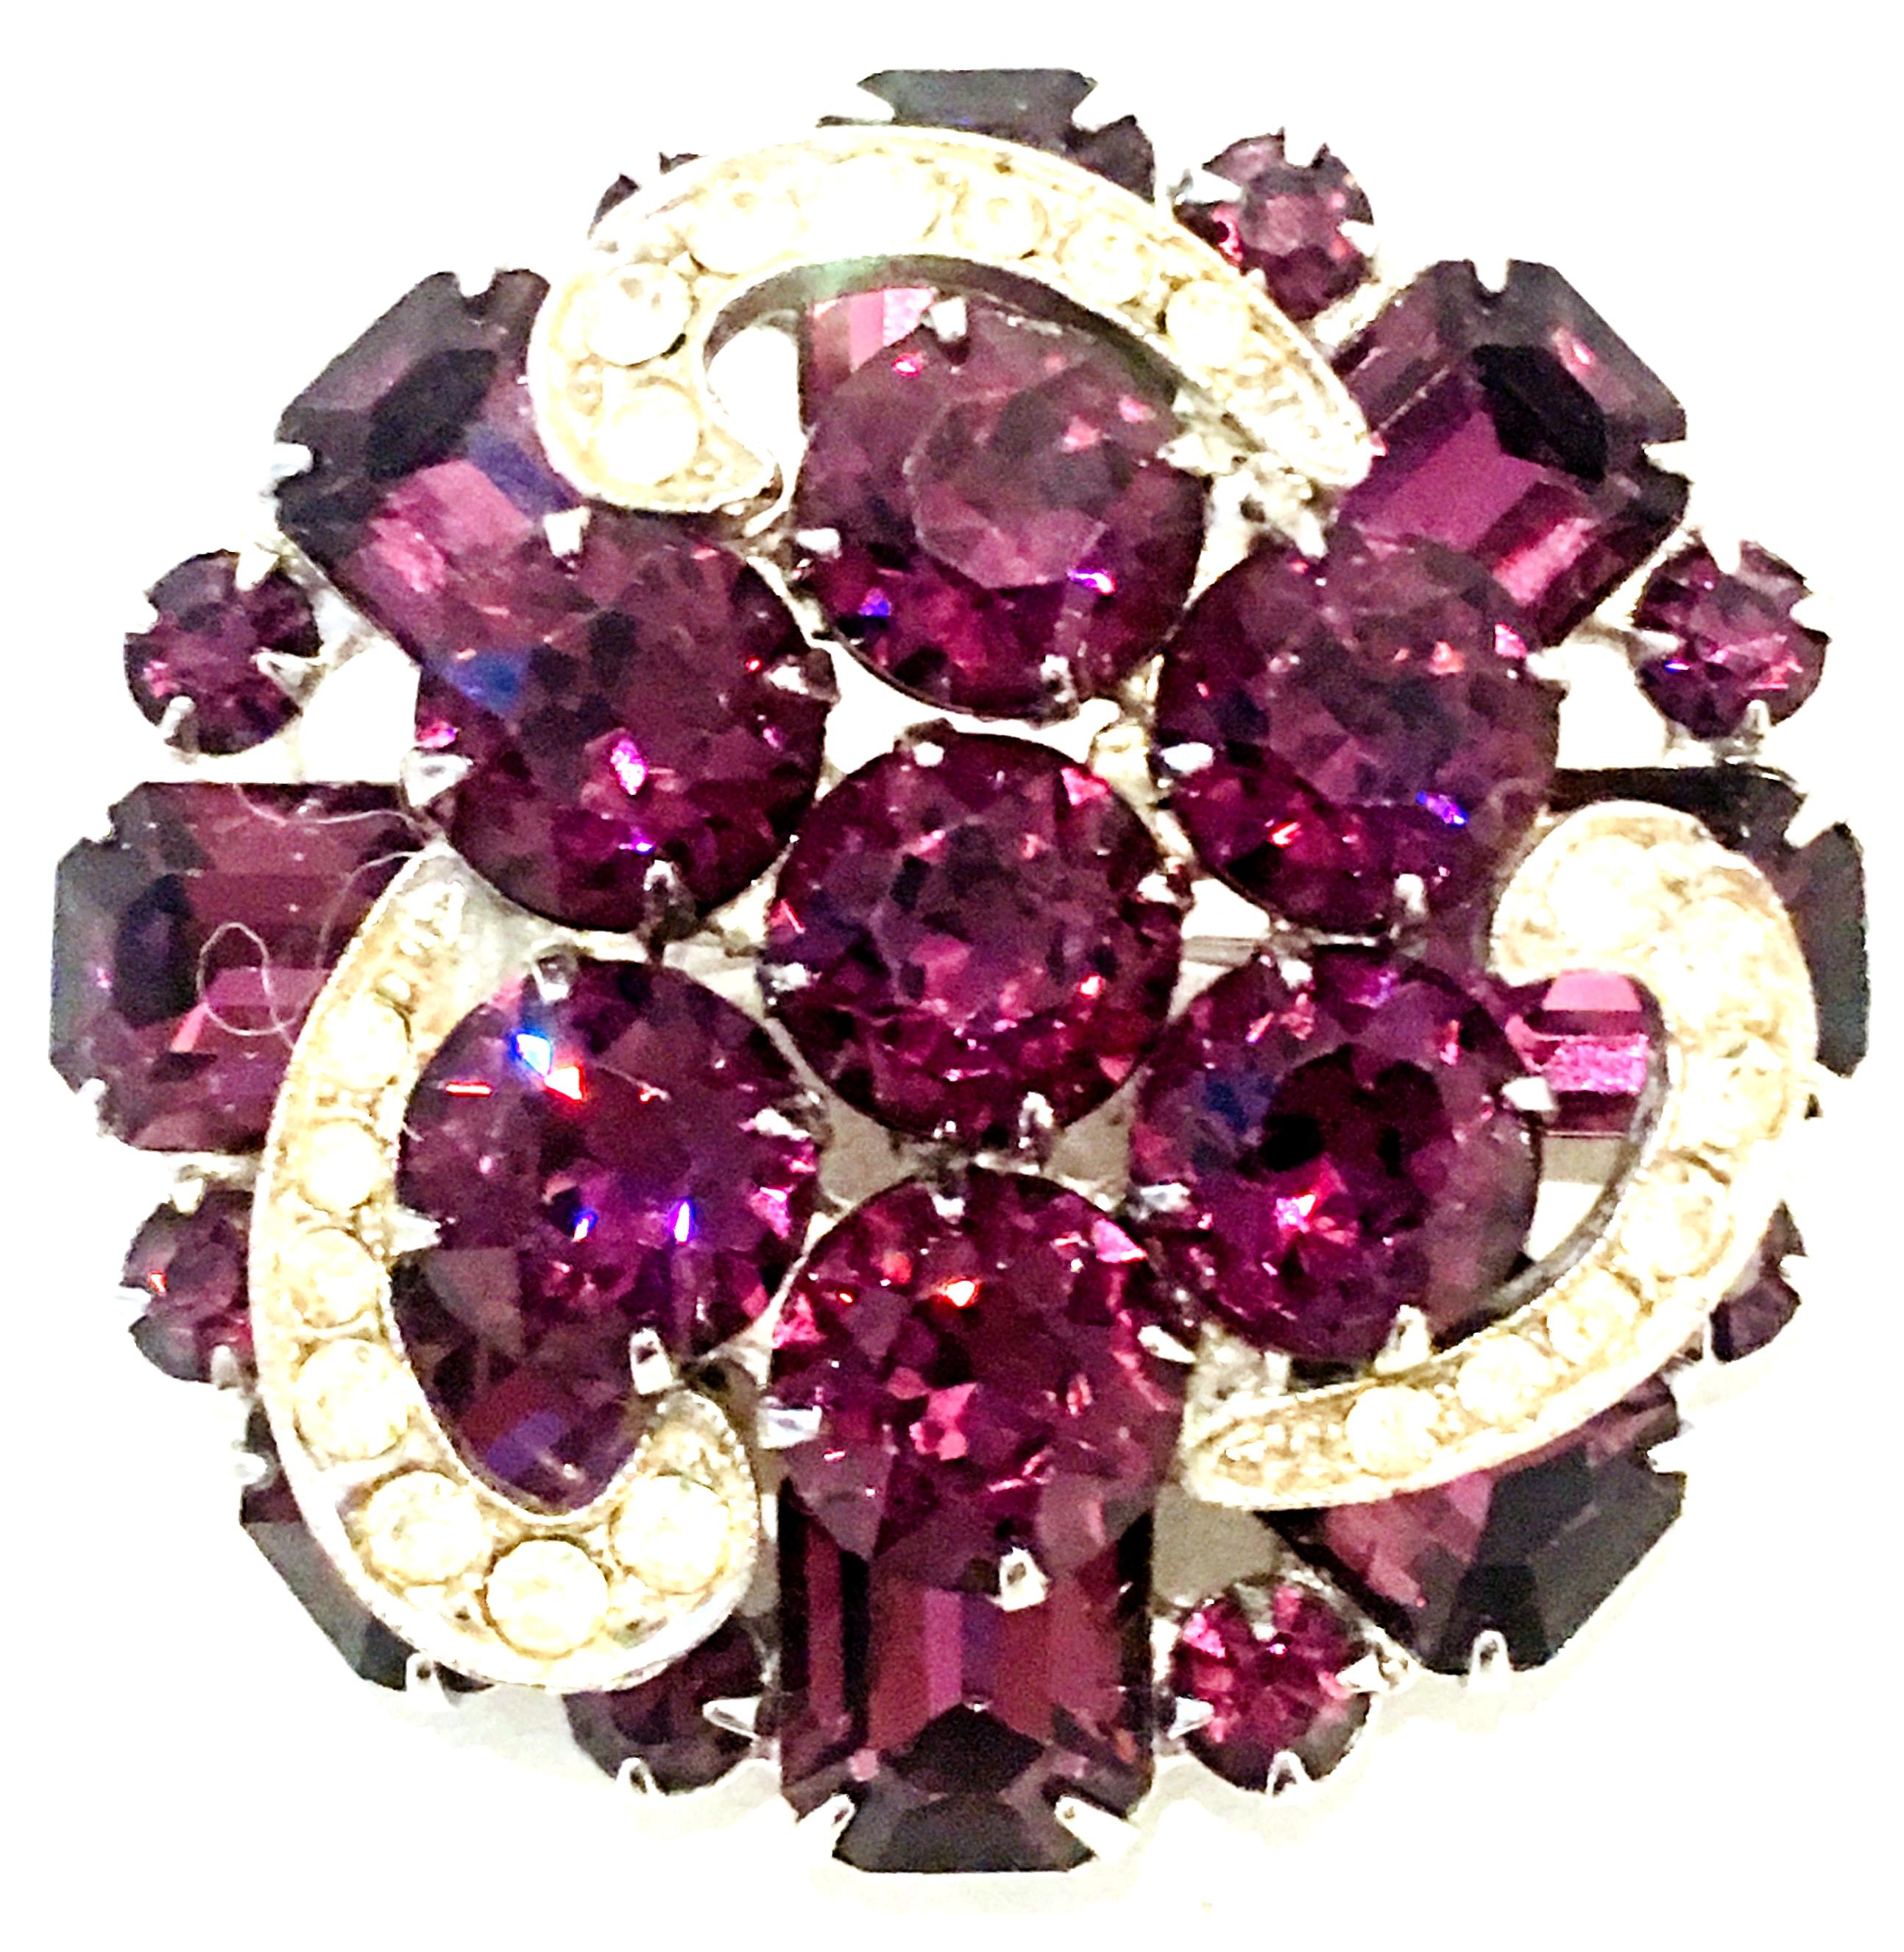 20th Century Silver & Austrian Amethyst Crystal Dimensional Brooch By, Weiss. Signed on the underside, Weiss.